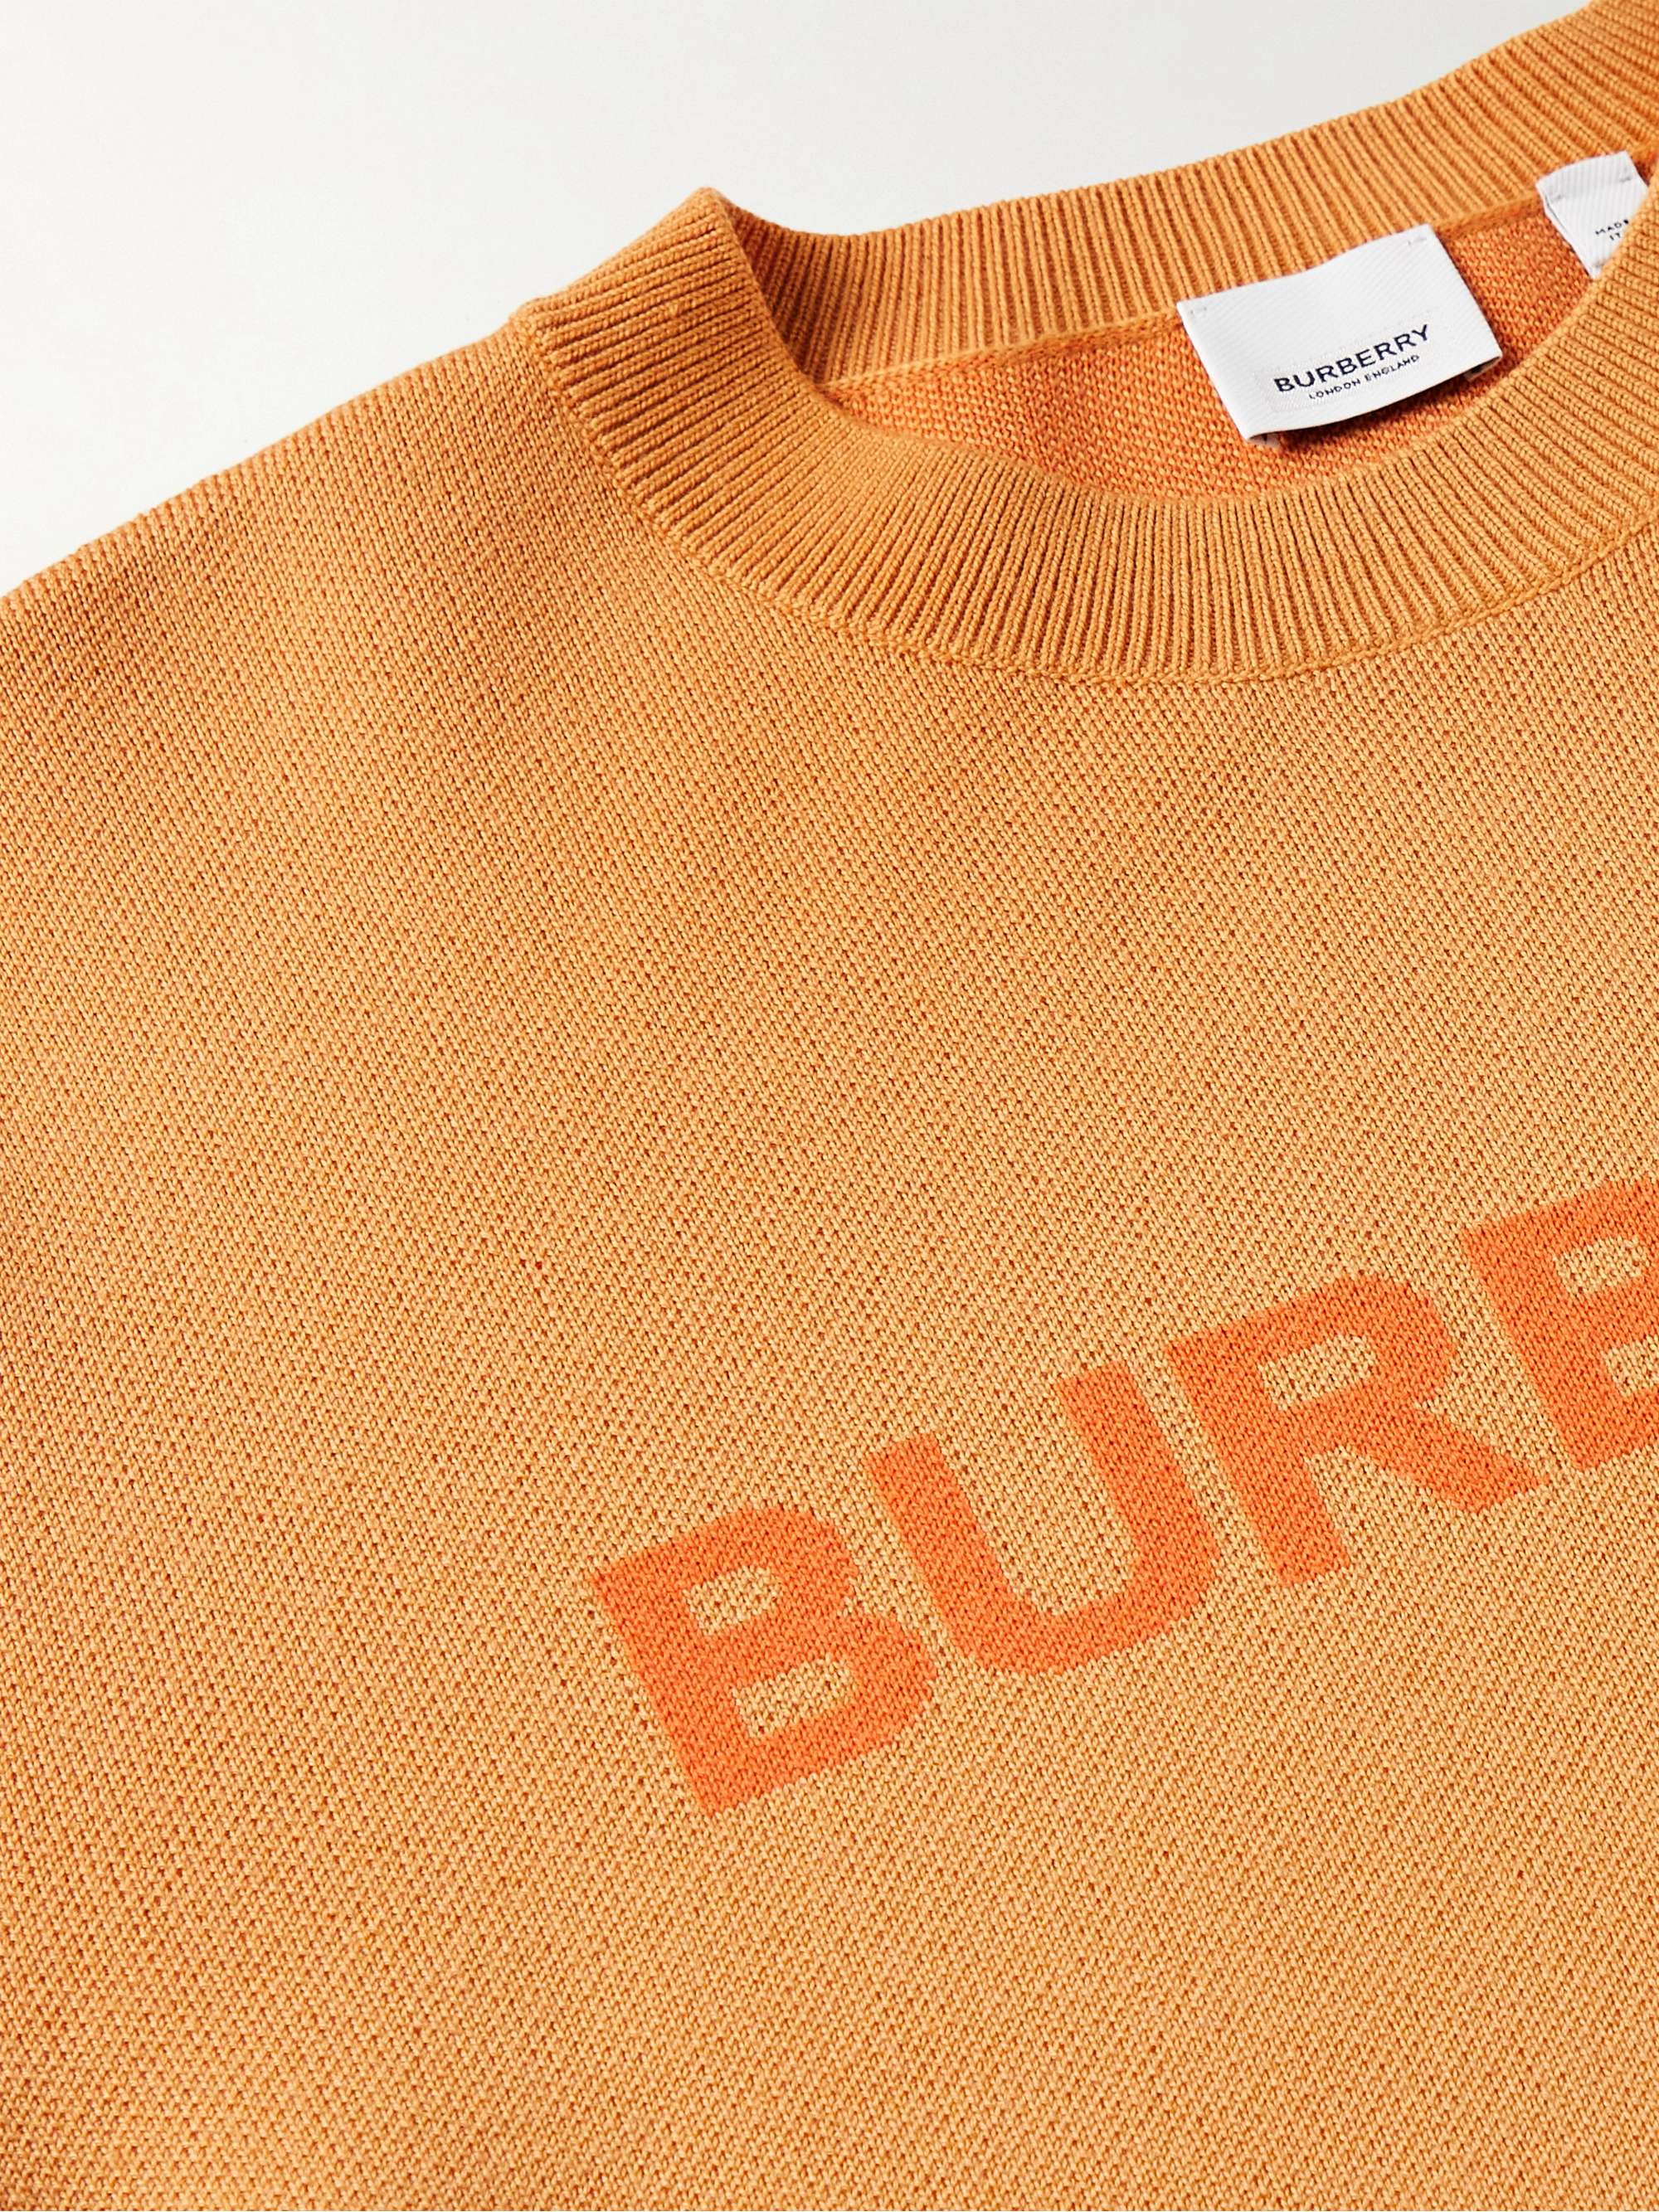 BURBERRY Logo-Intarsia Wool and Cotton-Blend Sweater